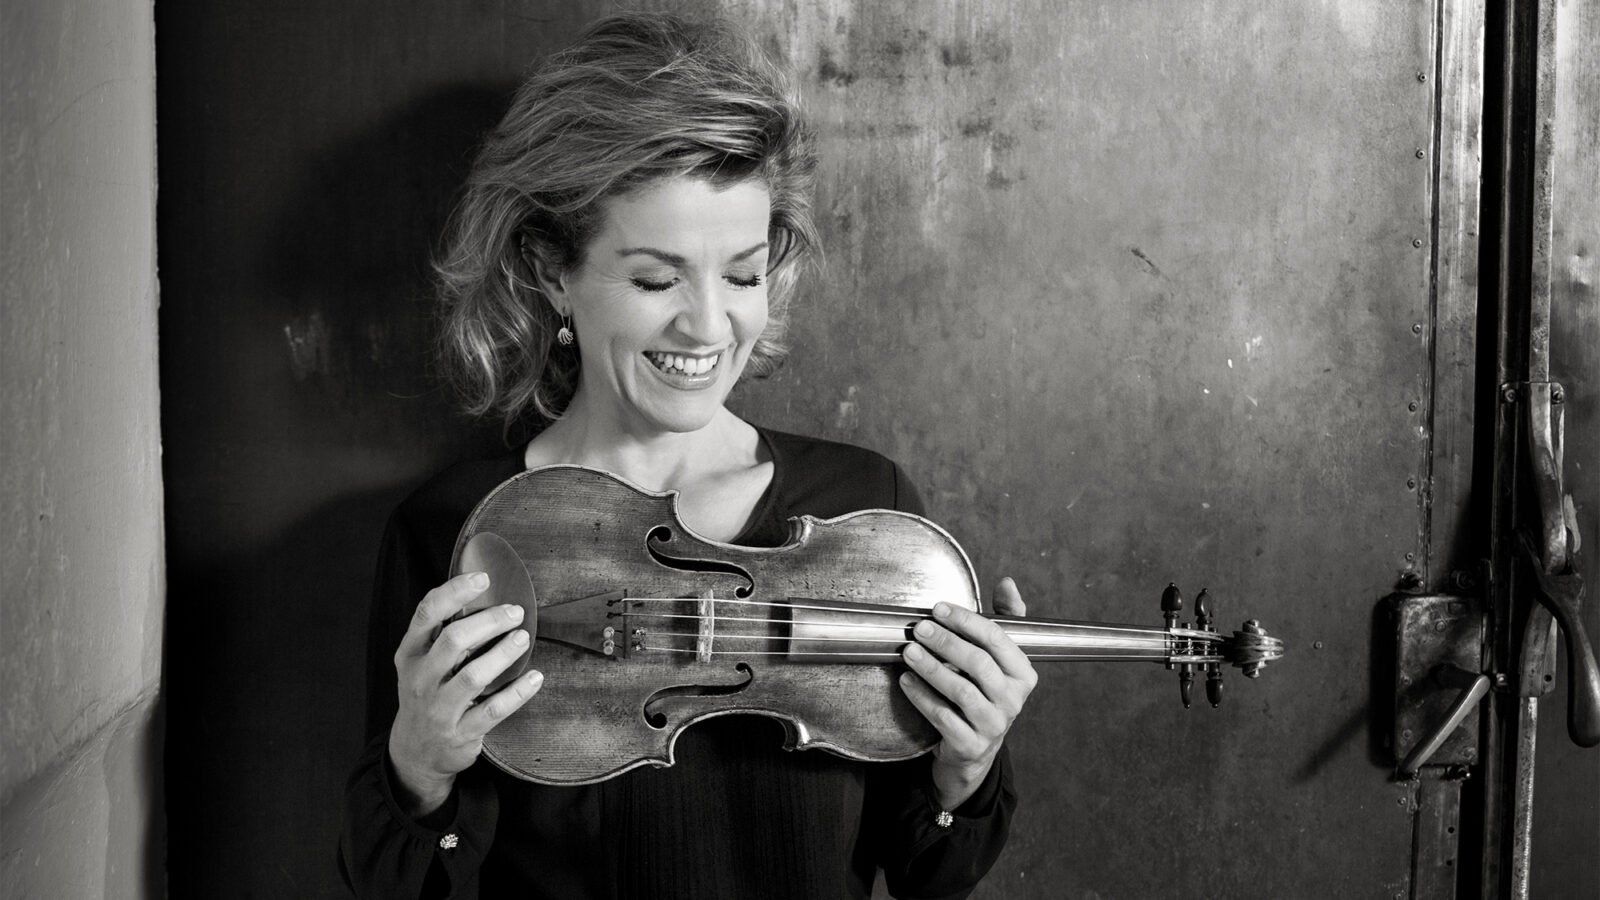 Featured image for “Video: Anne-Sophie Mutter On What Every Musician Should Know That They Can’t Learn in School”